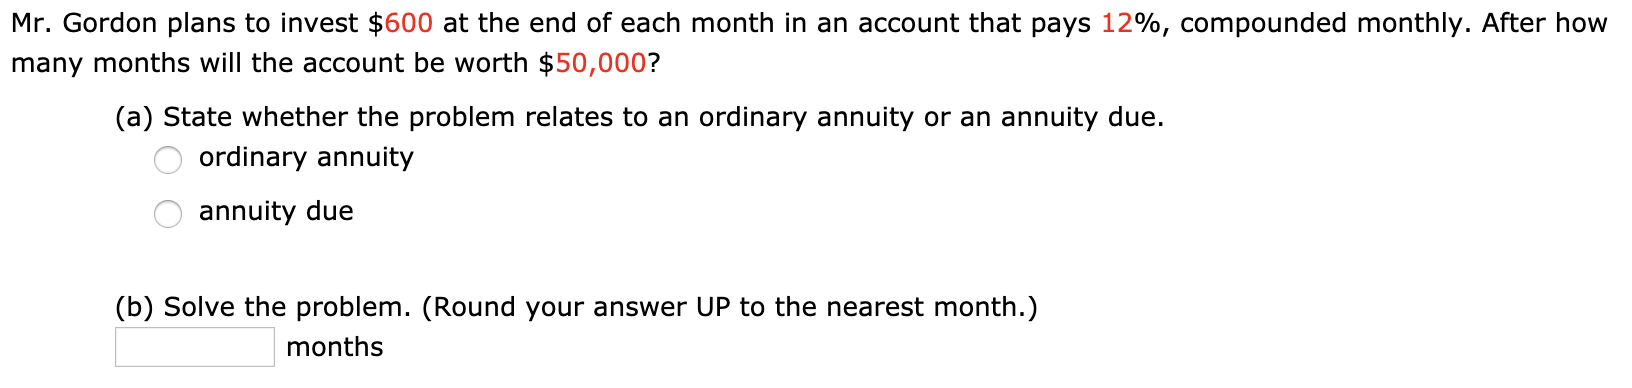 Mr. Gordon plans to invest $600 at the end of each month in an account that pays 12%, compounded monthly. After how
many months will the account be worth $50,000?
(a) State whether the problem relates to an ordinary annuity or an annuity due.
ordinary annuity
annuity due
(b) Solve the problem. (Round your answer UP to the nearest month.)
months
